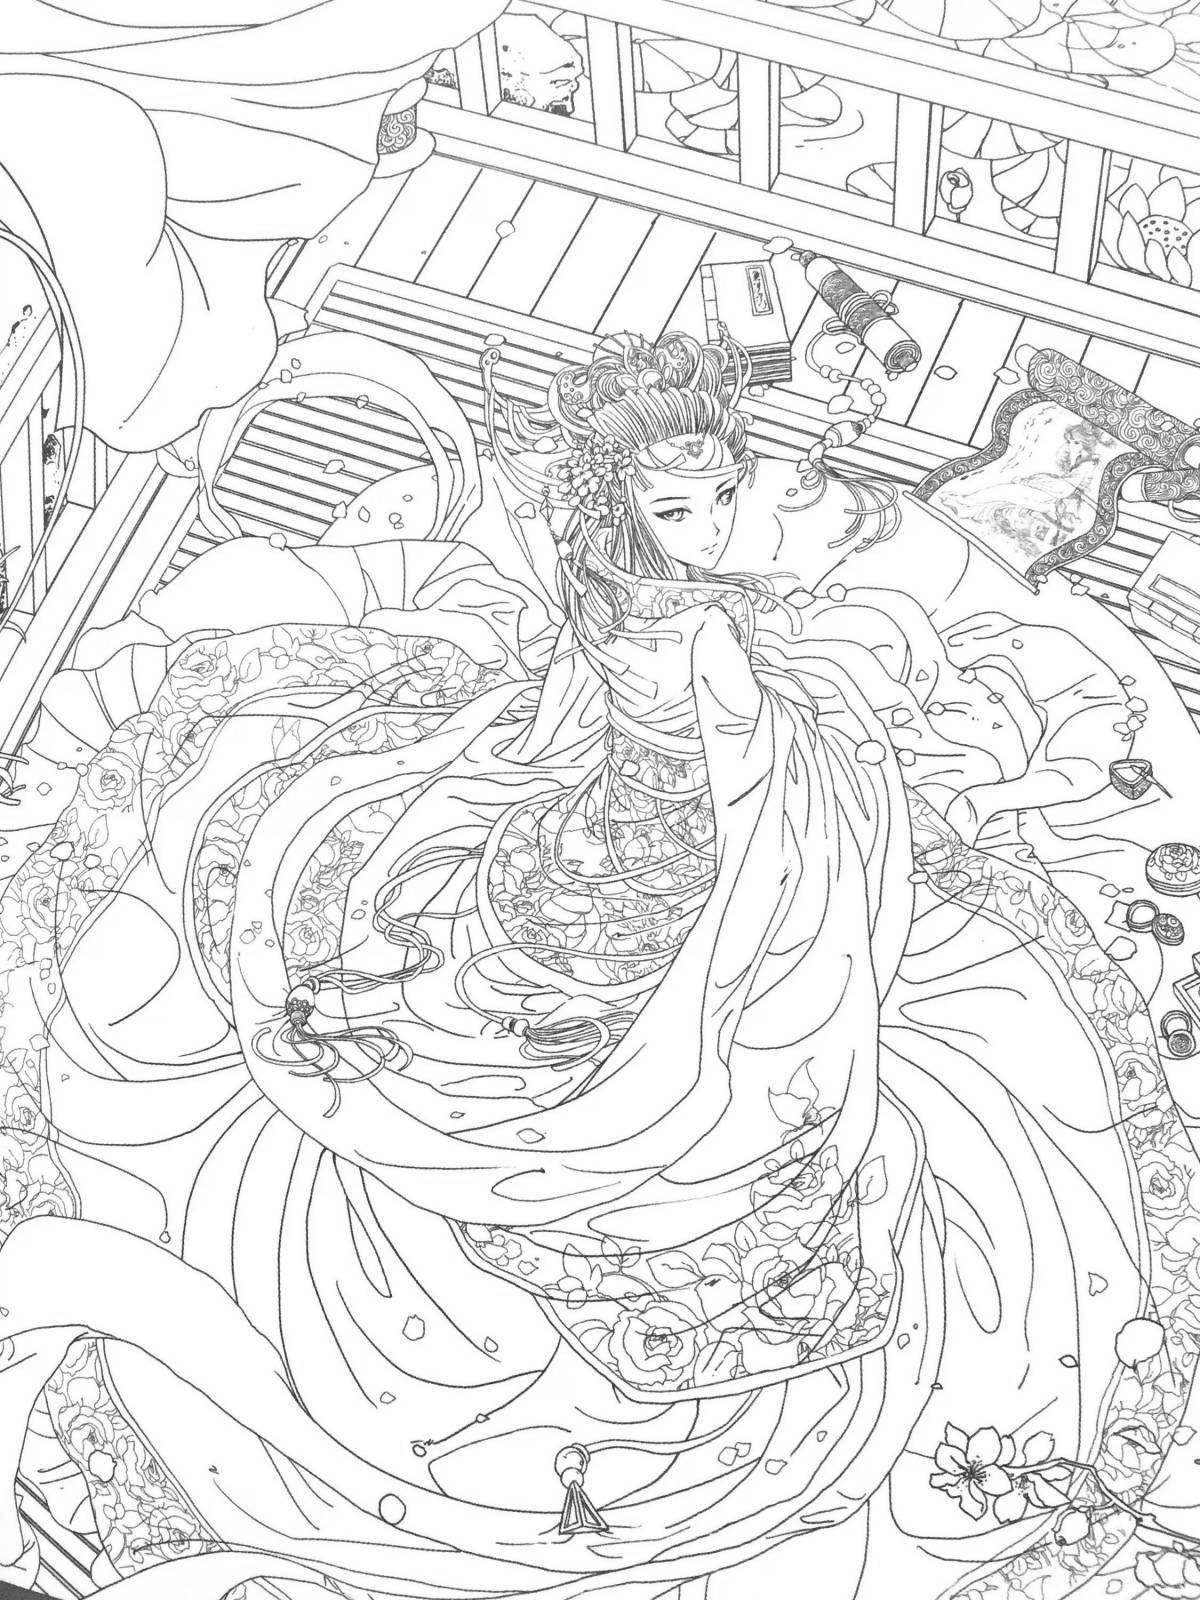 Exciting anime style anti-stress coloring book